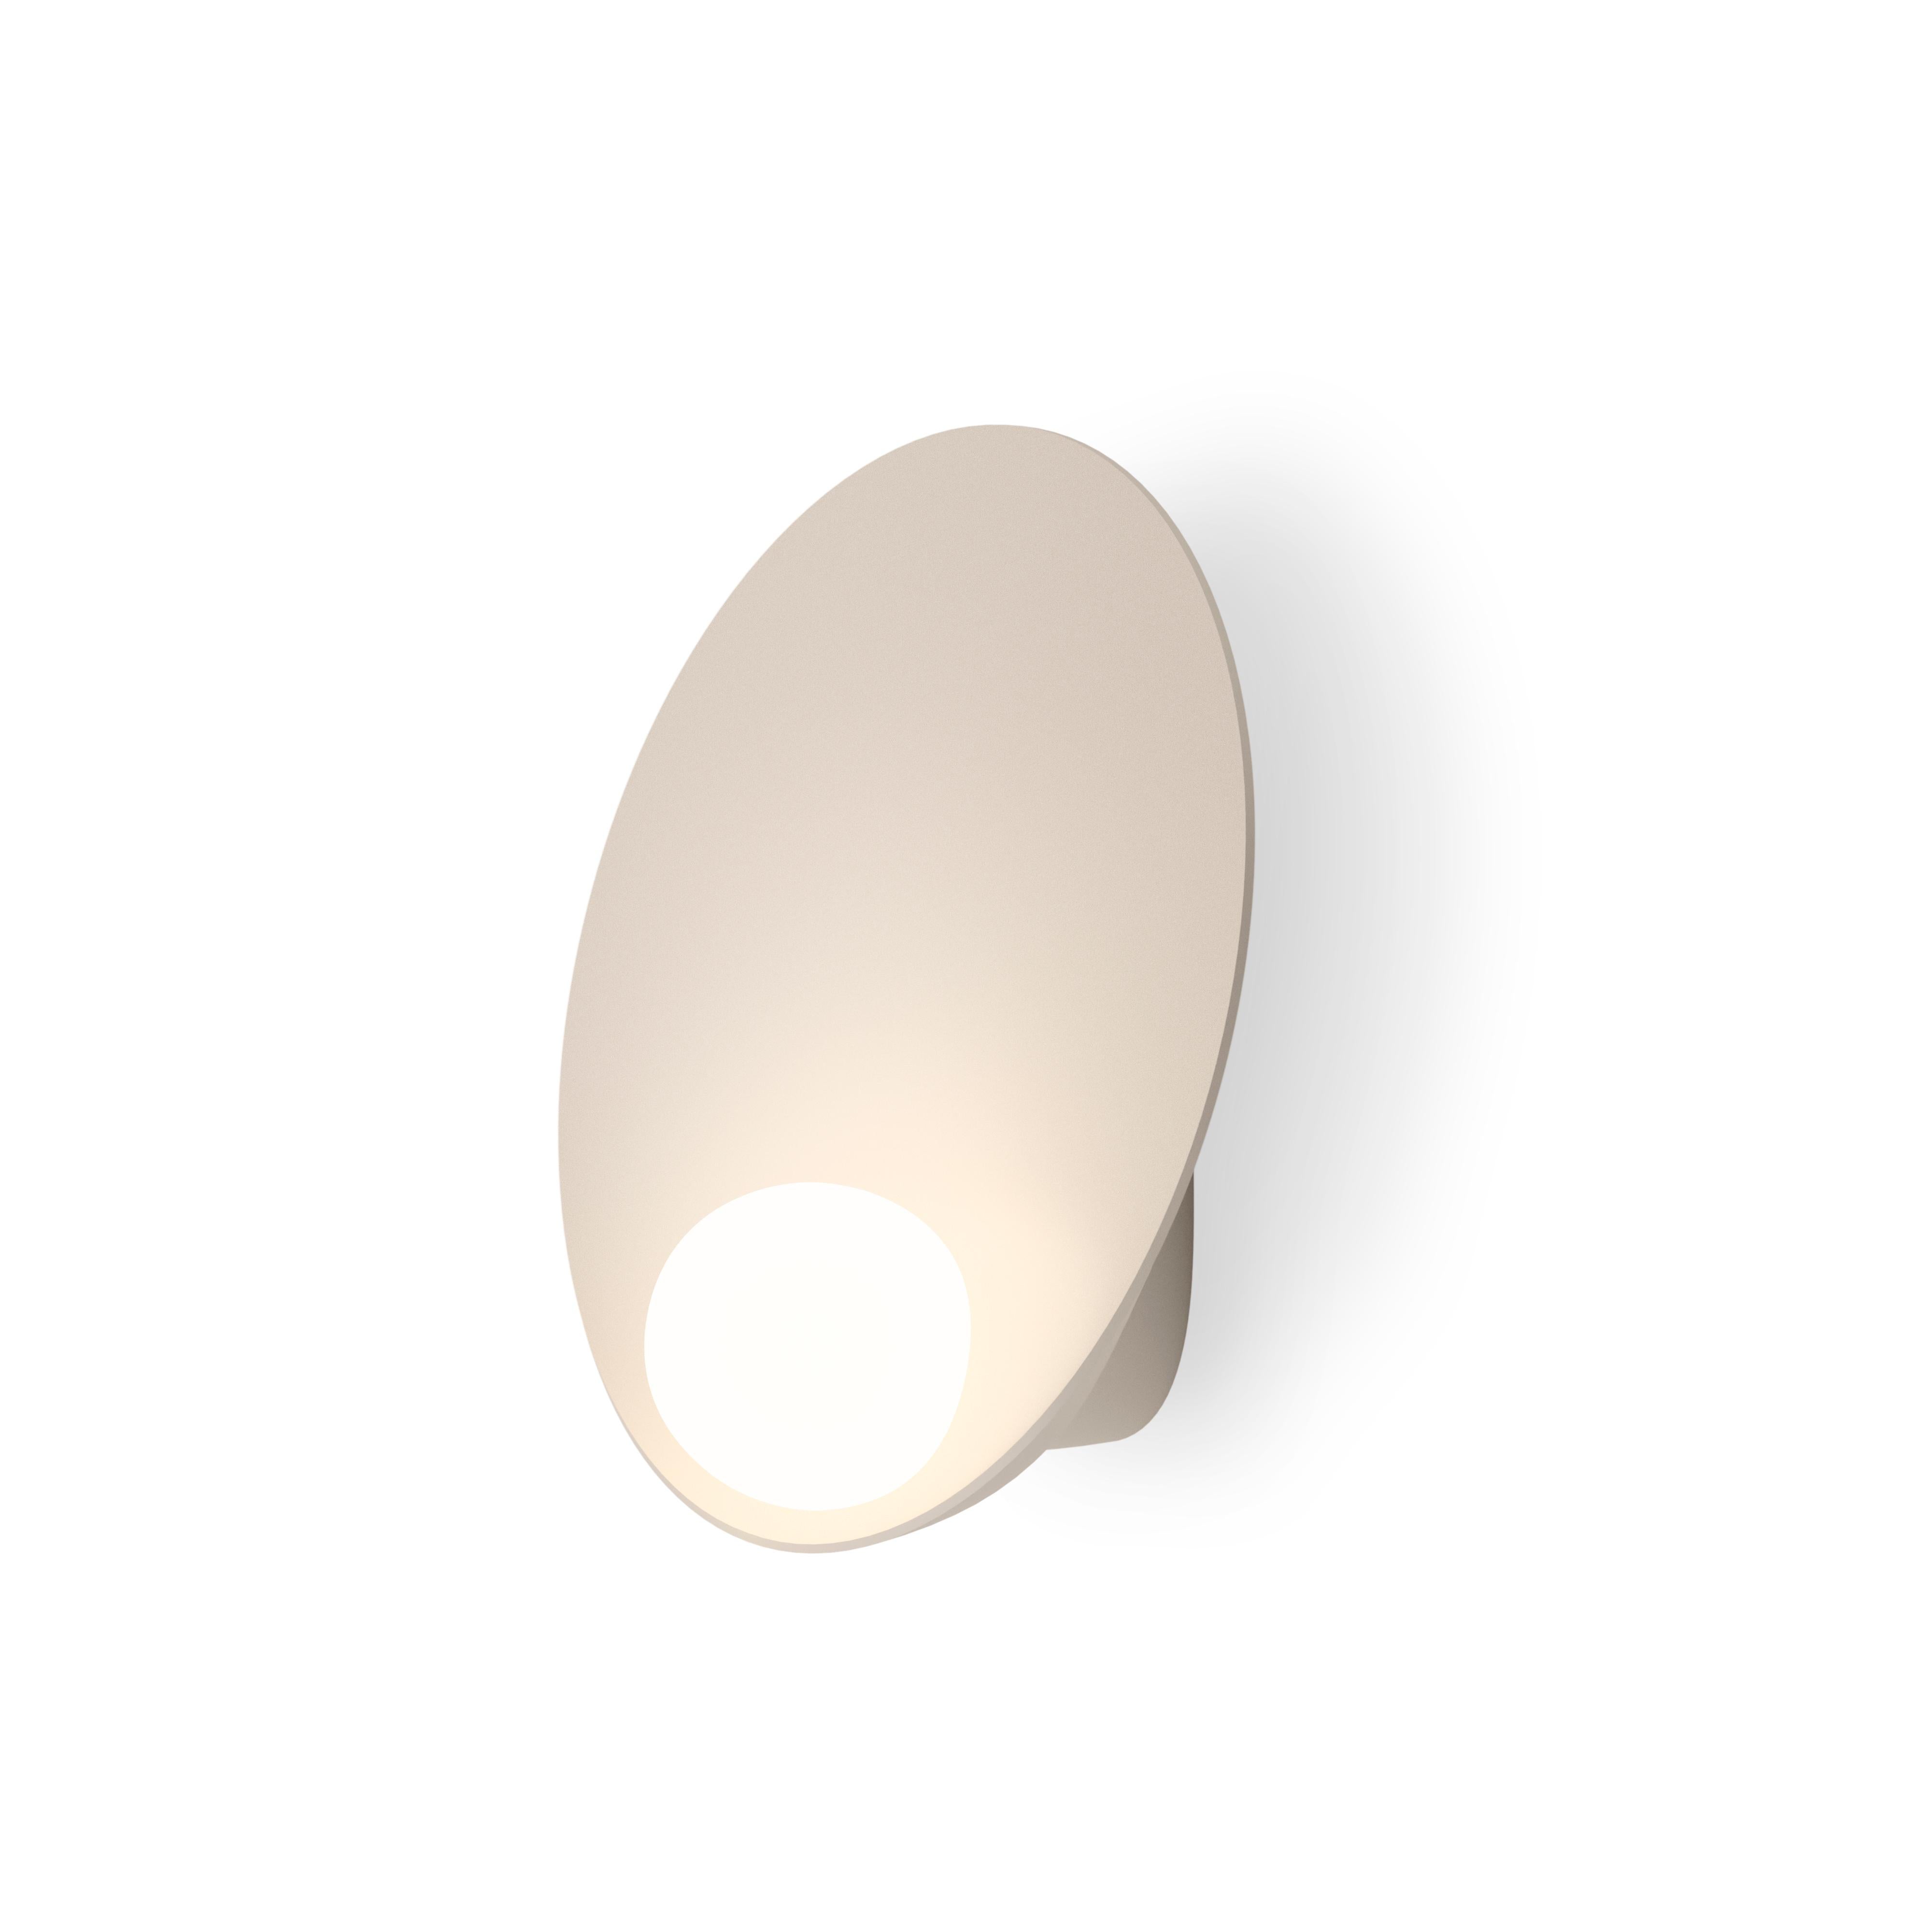 Musa, made from an aluminum base with a triple blown-glass opal diffuser, combines delicacy and subtlety. The base captures light as the small glass sphere transforms it into a soft illumination. The wall lamp remains cool to the touch thanks to an